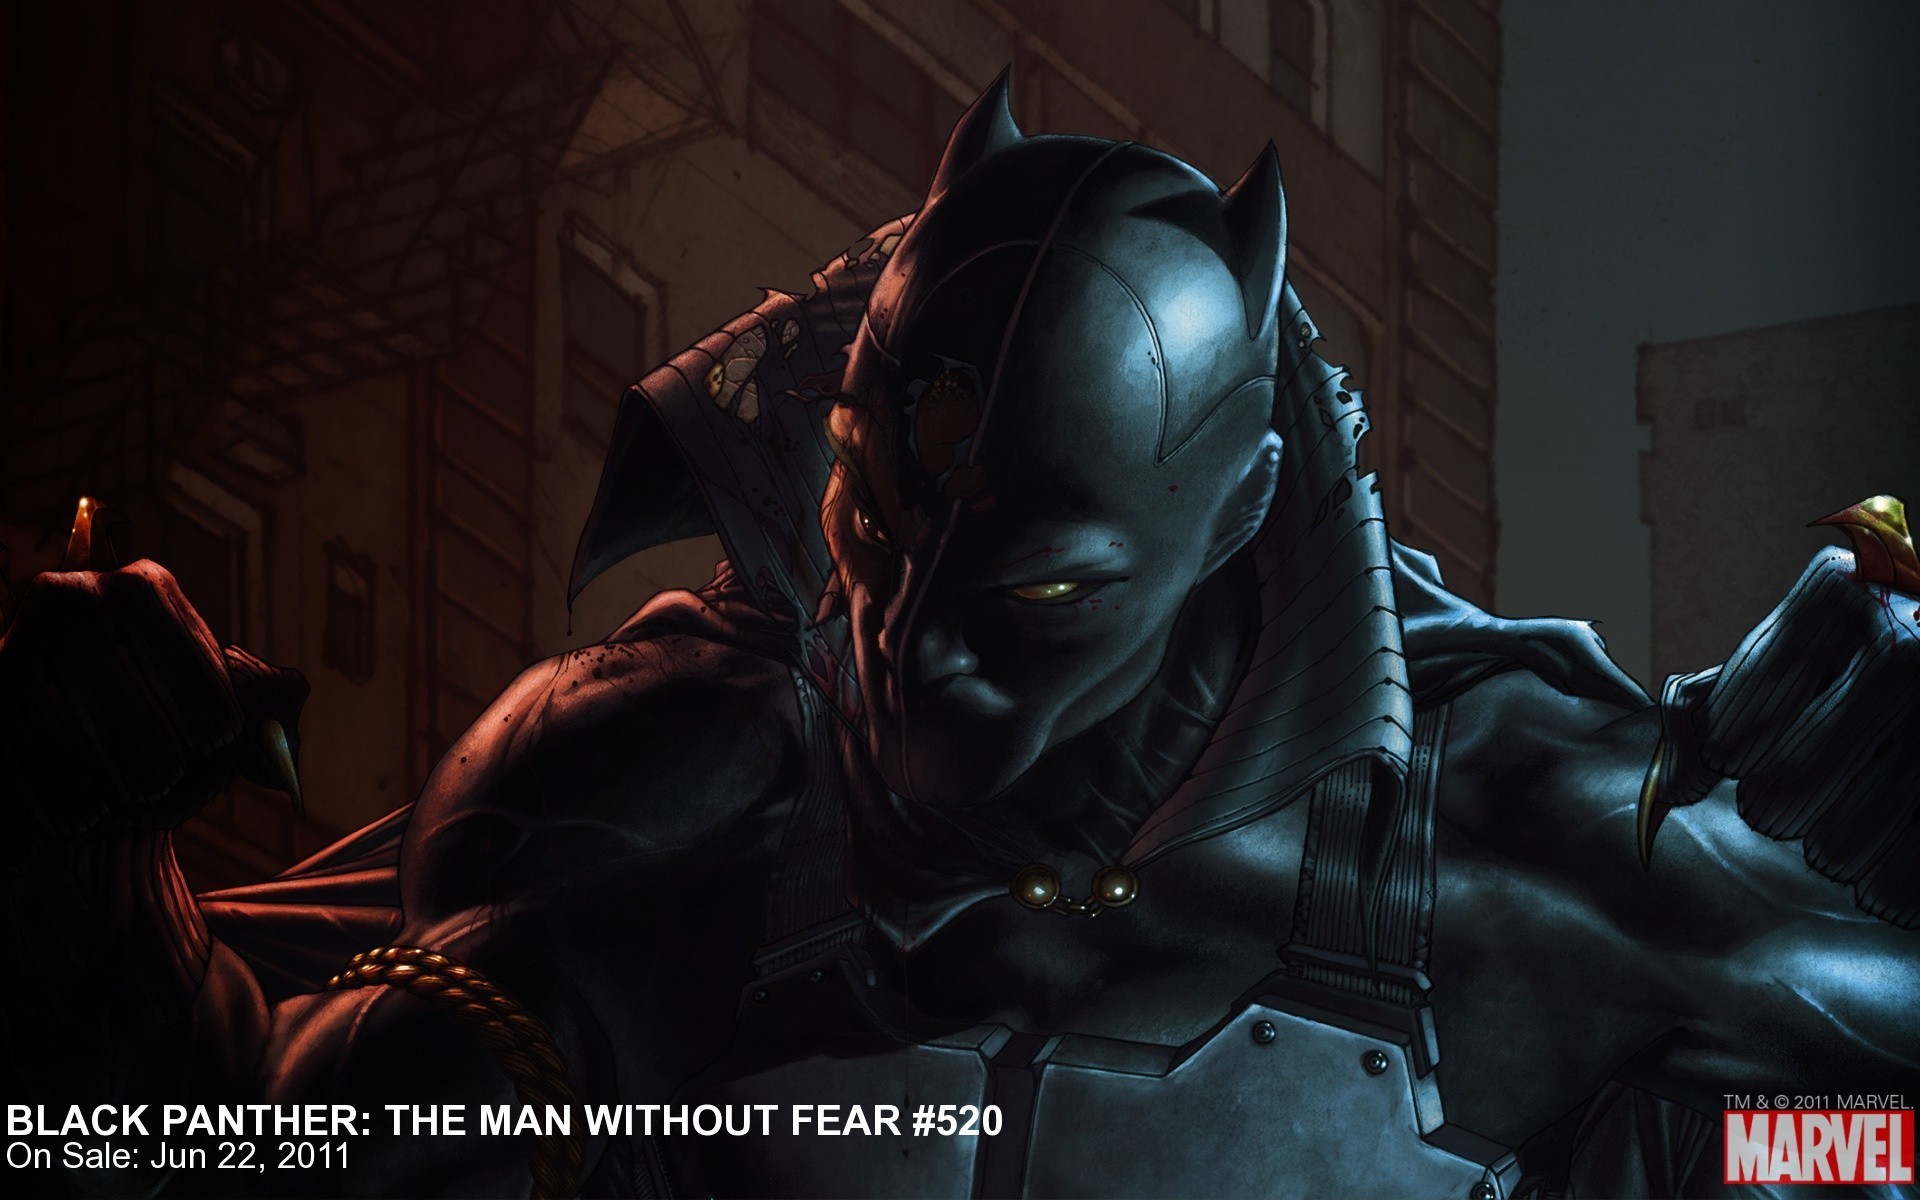 1920x1200  Black Panther: Man Without Fear #520 Wallpaper | Marvel.com